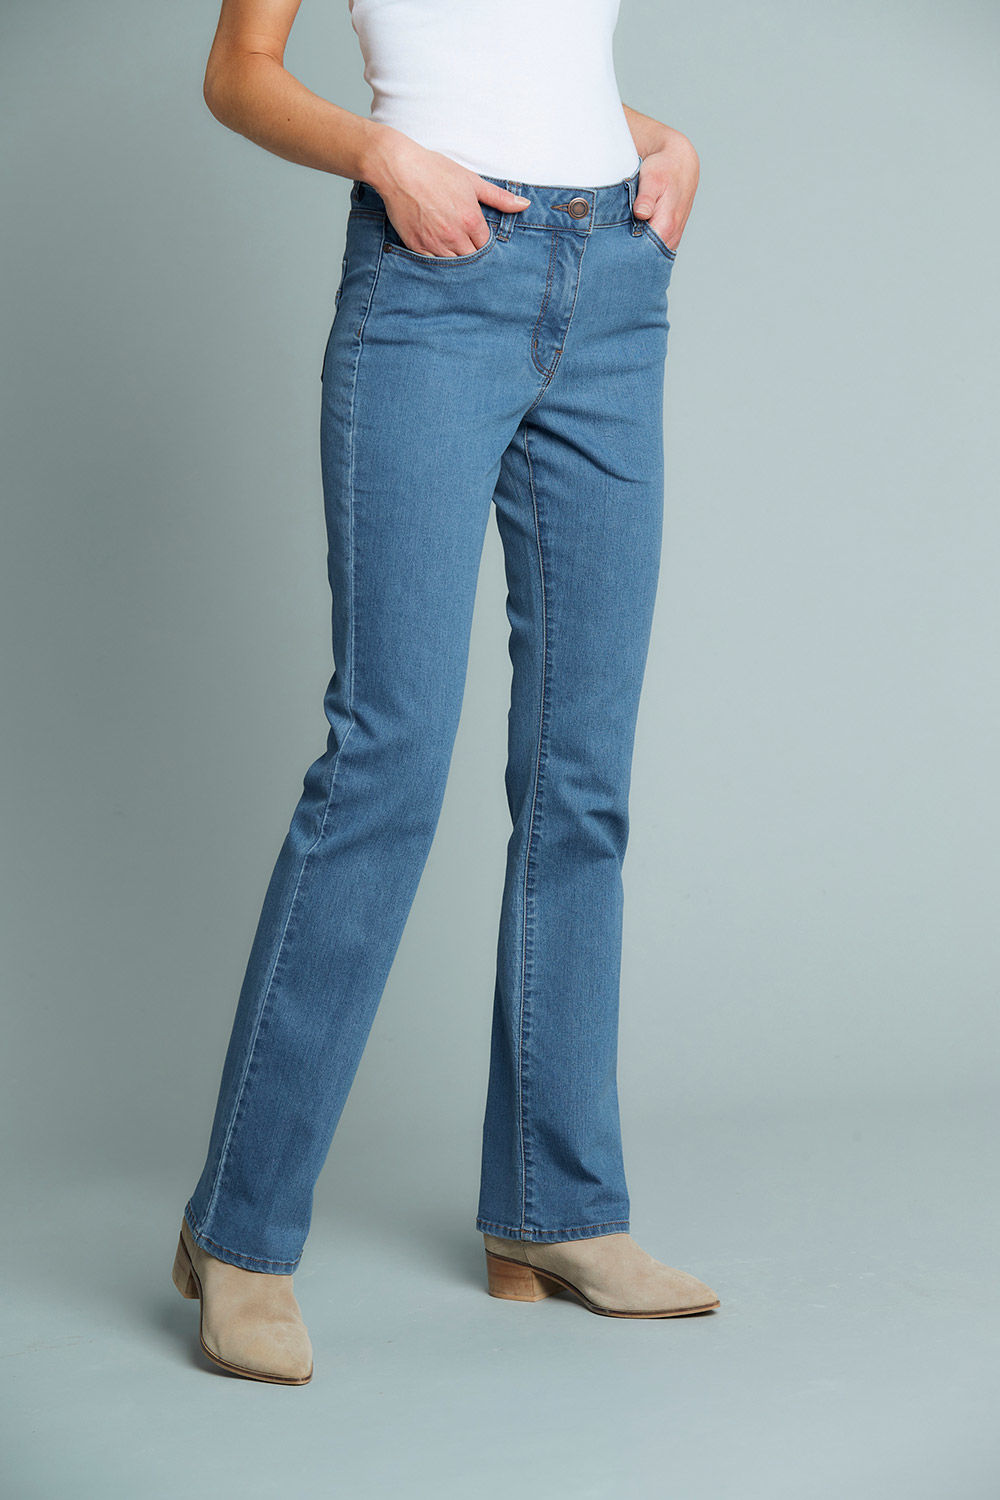 Women's Jeans Fit Guide: Find your 